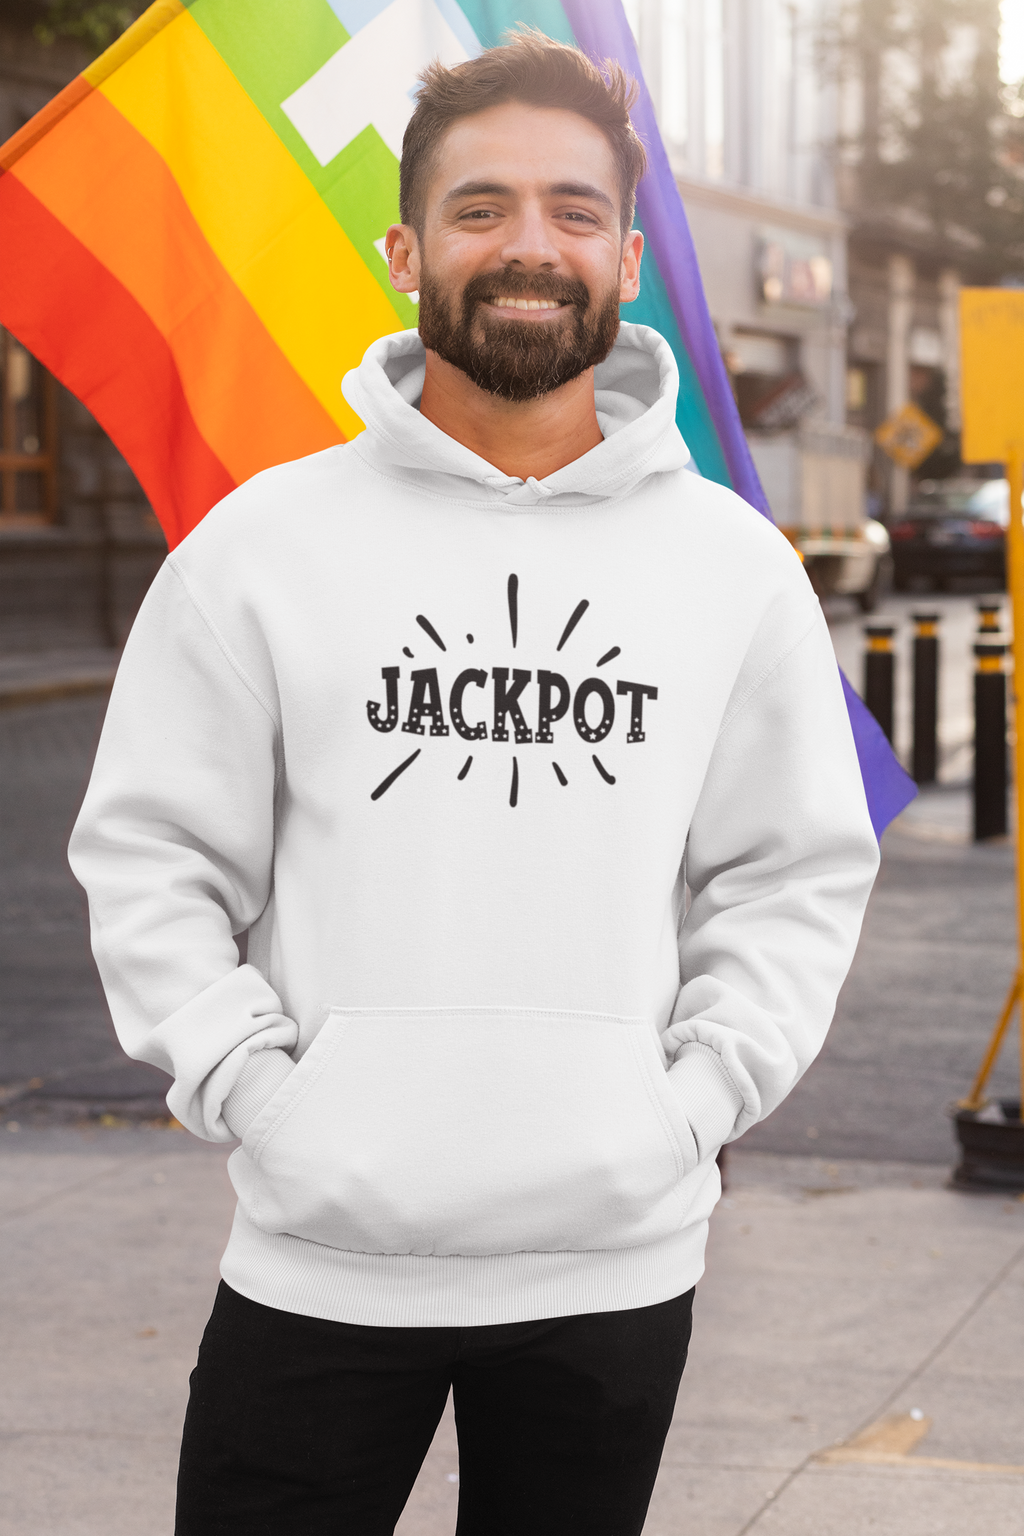 Jackpot Unisex Hooded Sweatshirt, Classic Fit, Gift Item - Cheers Together Gift House